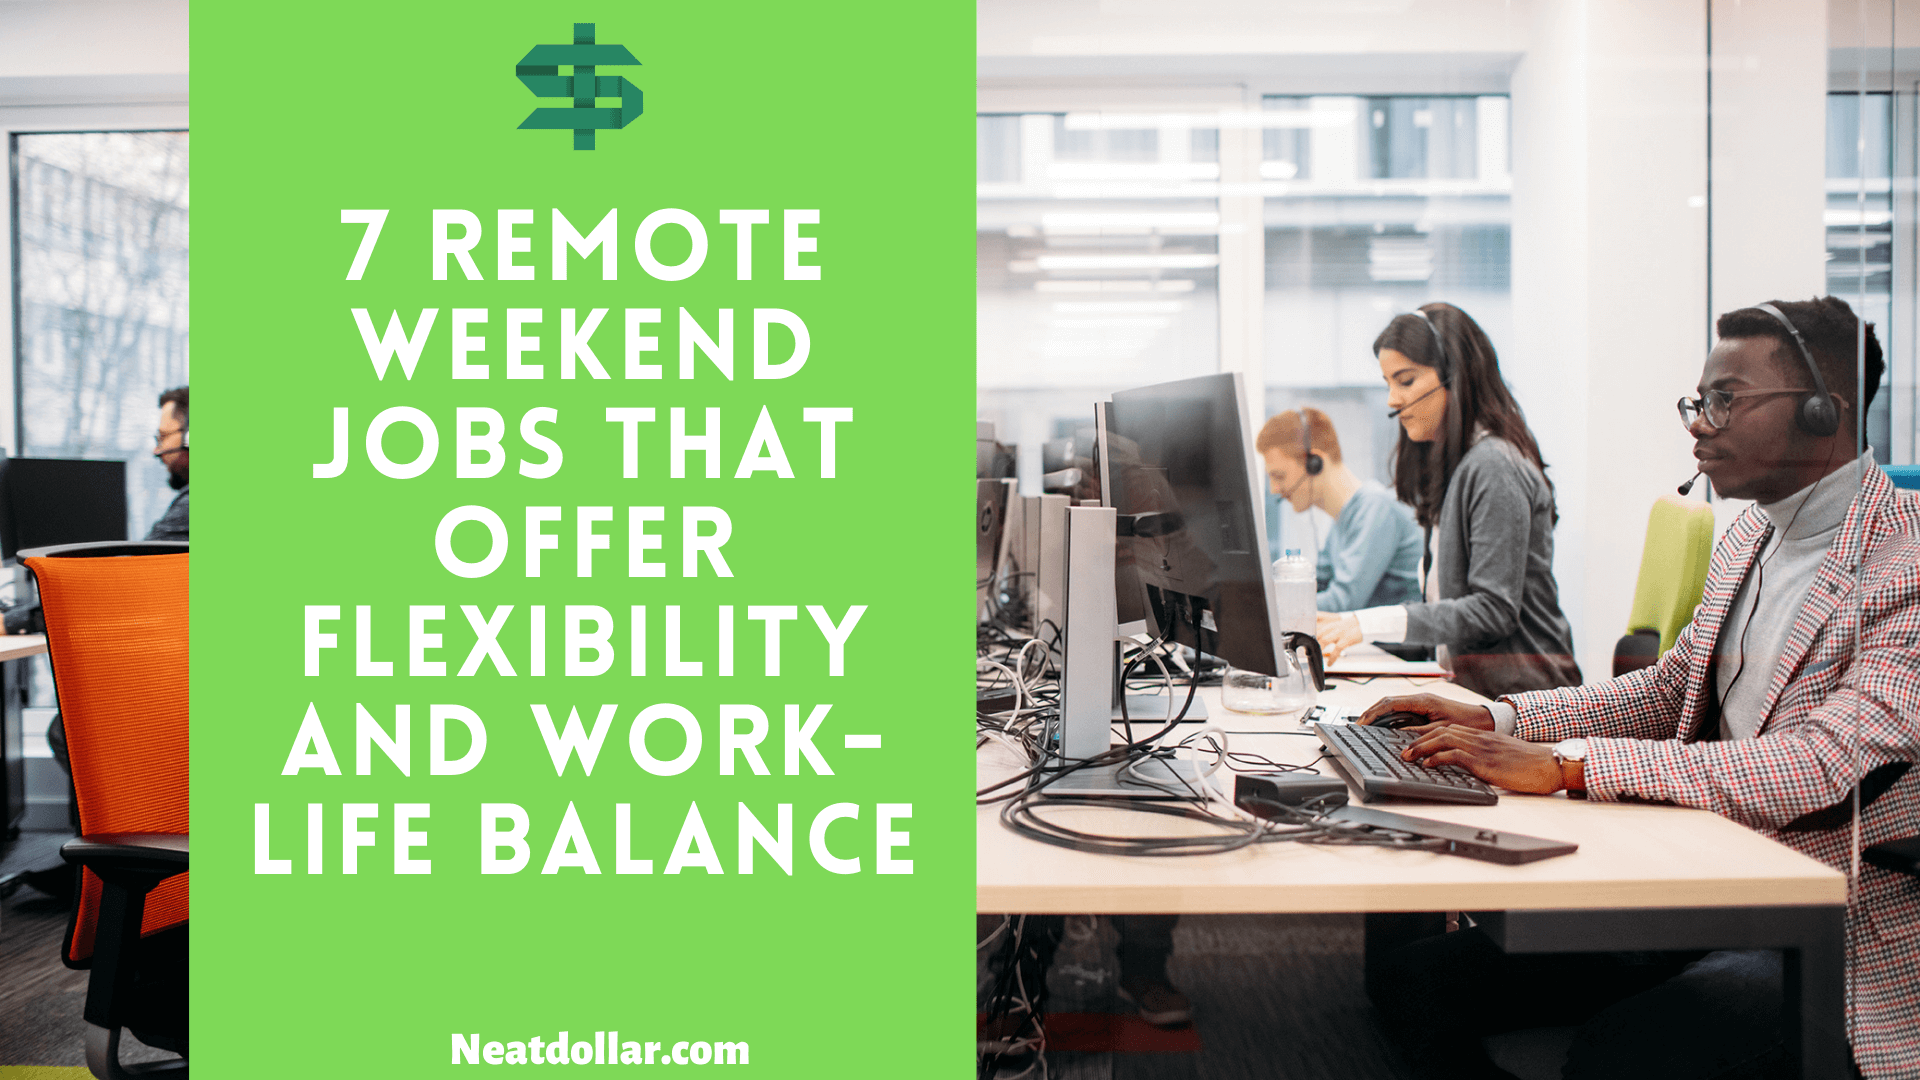 7-remote-weekend-jobs-that-offer-flexibility-and-work-life-balance